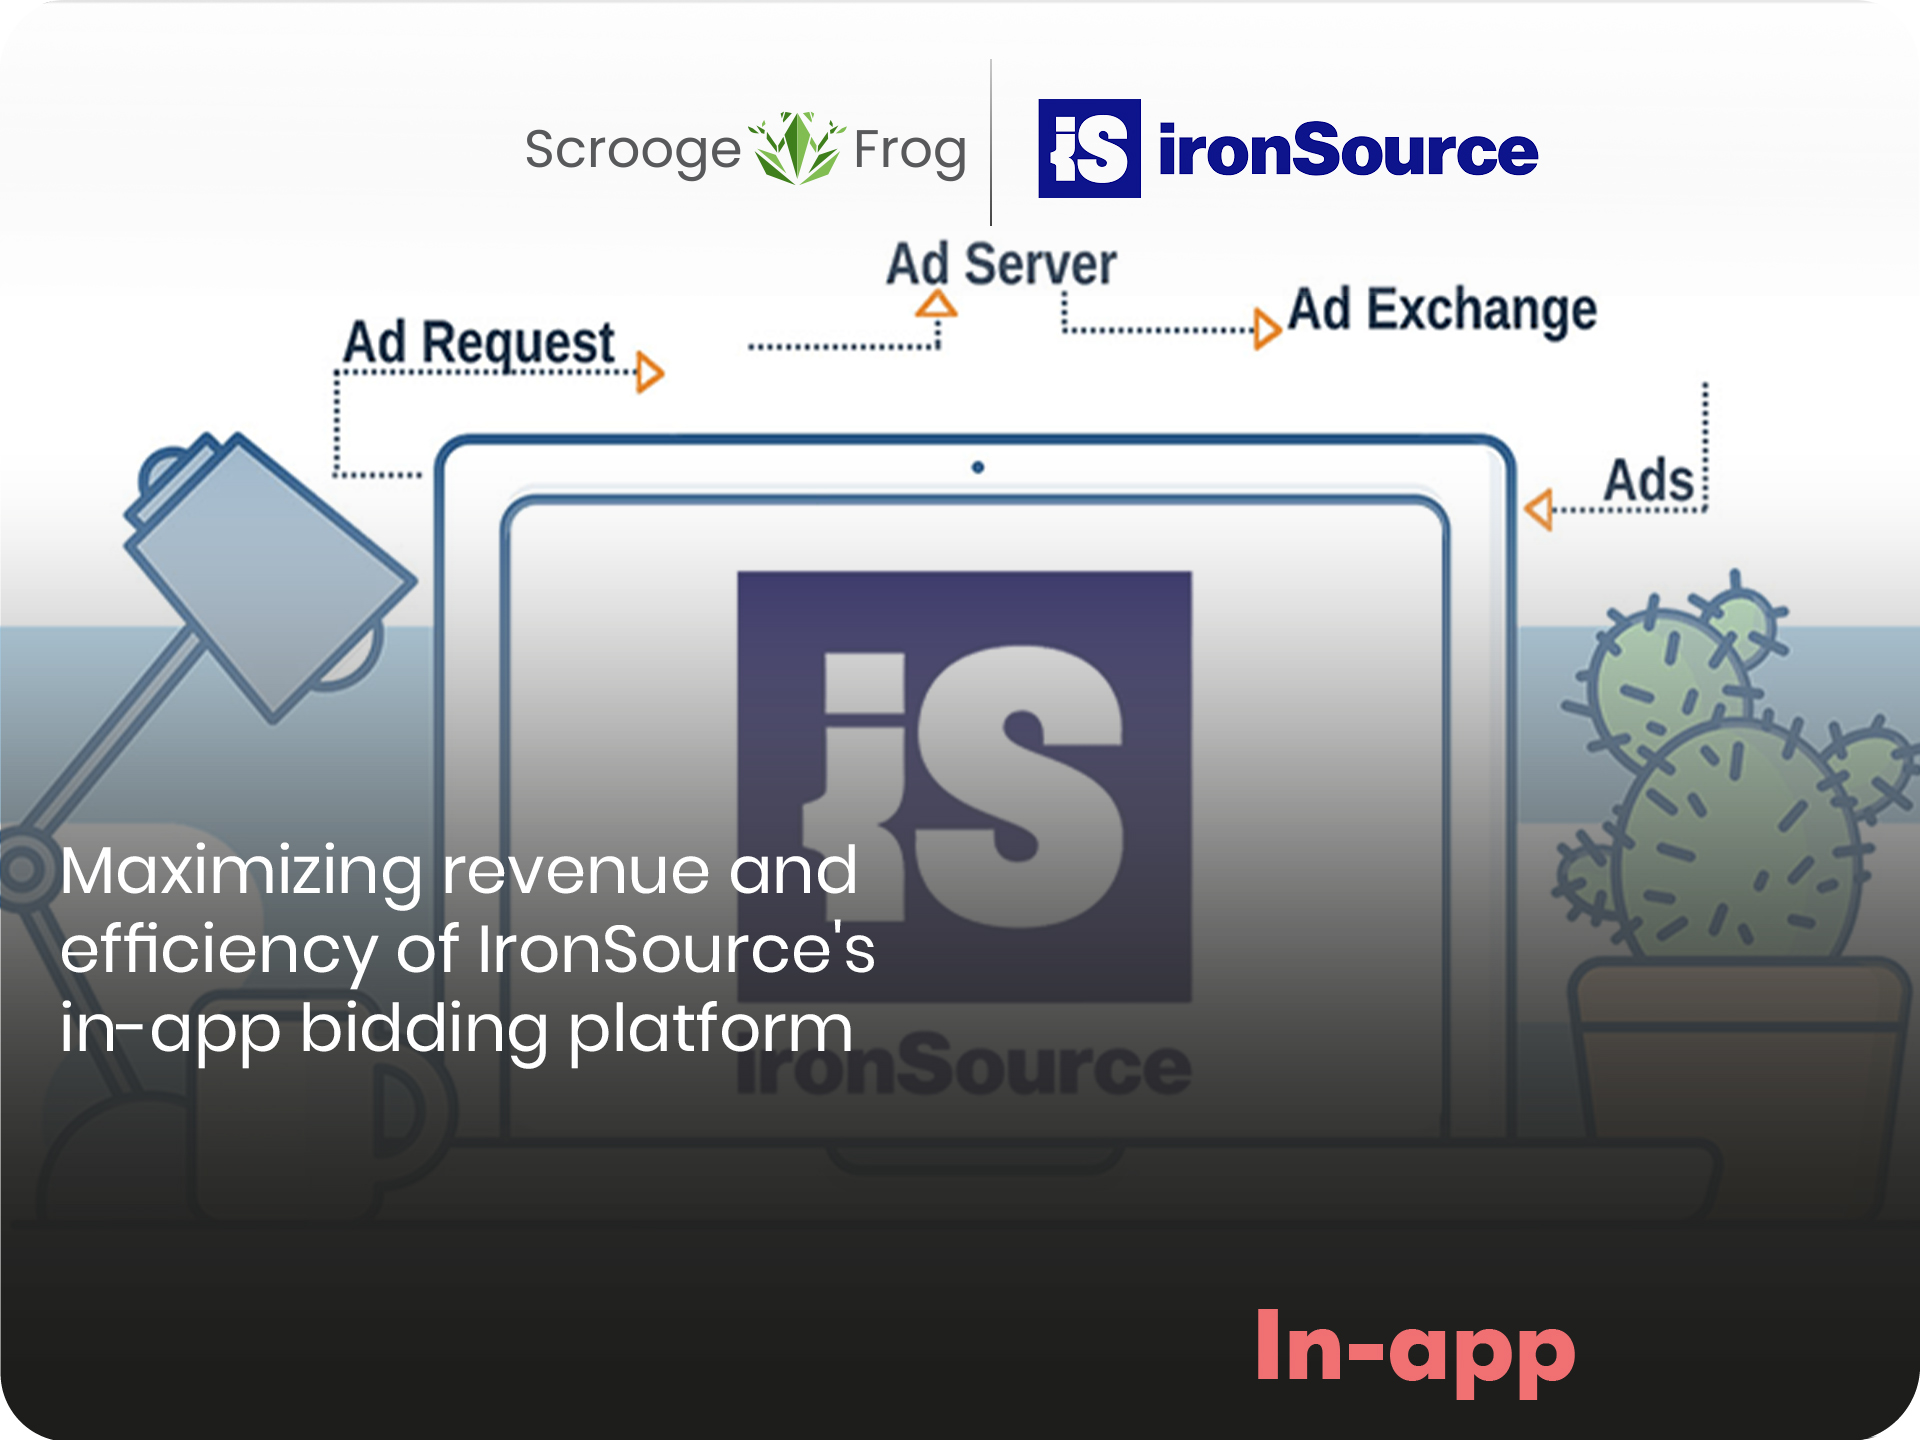 Maximizing revenue and efficiency of IronSource’s in-app bidding platform